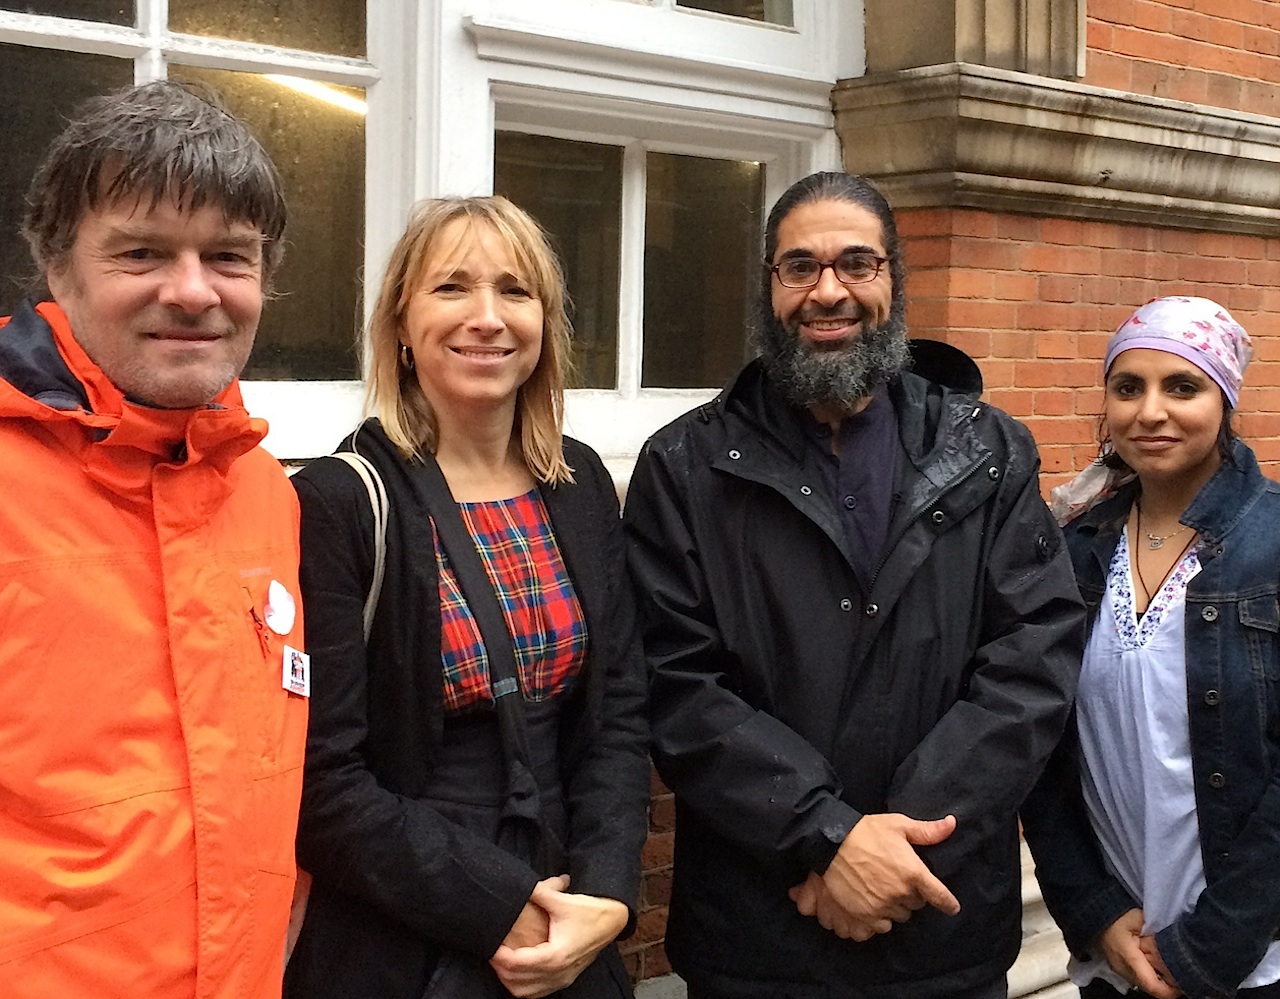 Andy Worthington, Joanne MacInnes, Shaker Aamer and doctor and journalist Saleyha Ahsan on November 17, 2015, after Shaker had met supporters and MPs in the Houses of Parliament.